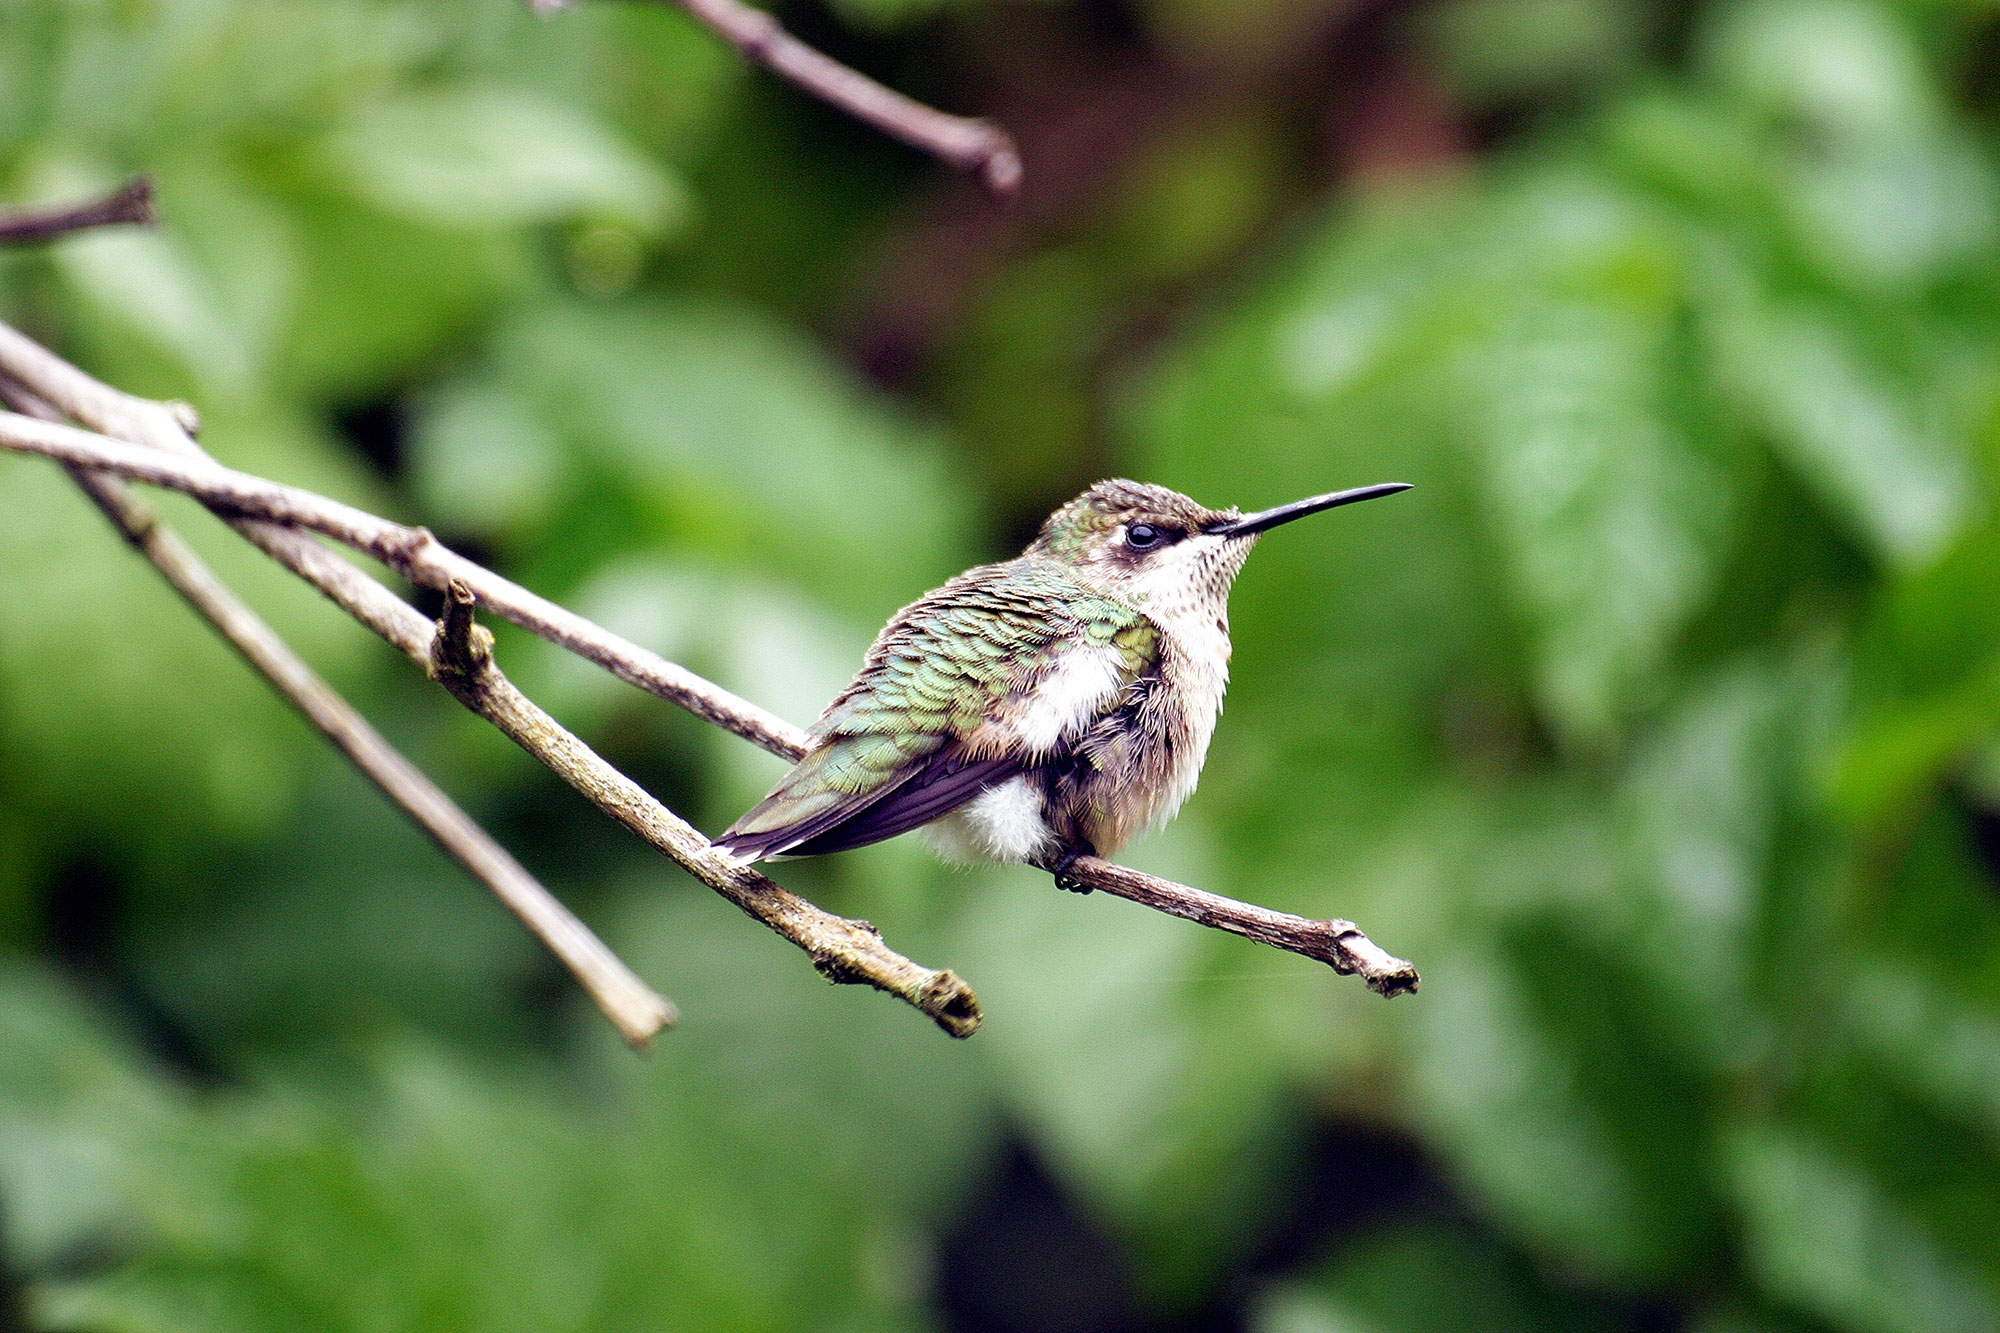 A ruby-throated hummingbird on a branch.